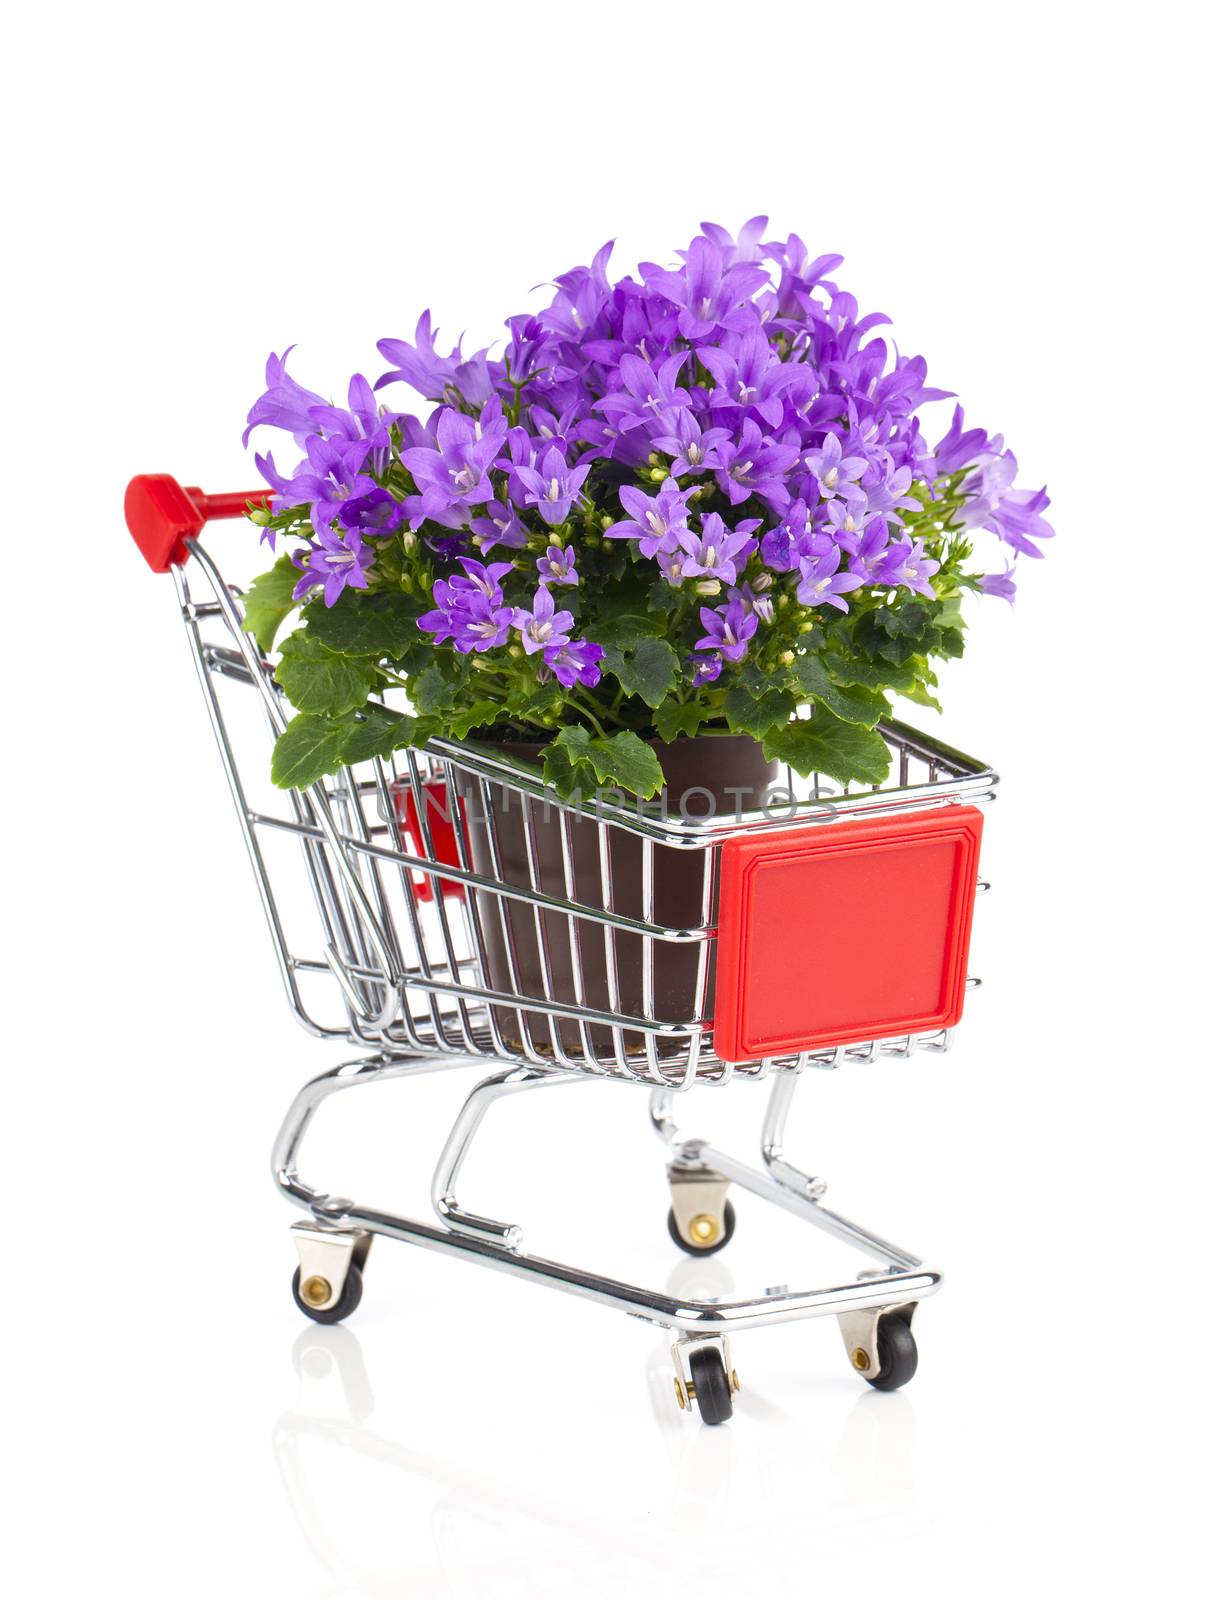 blue campanula flowers in a Shopping cart, on white background by motorolka